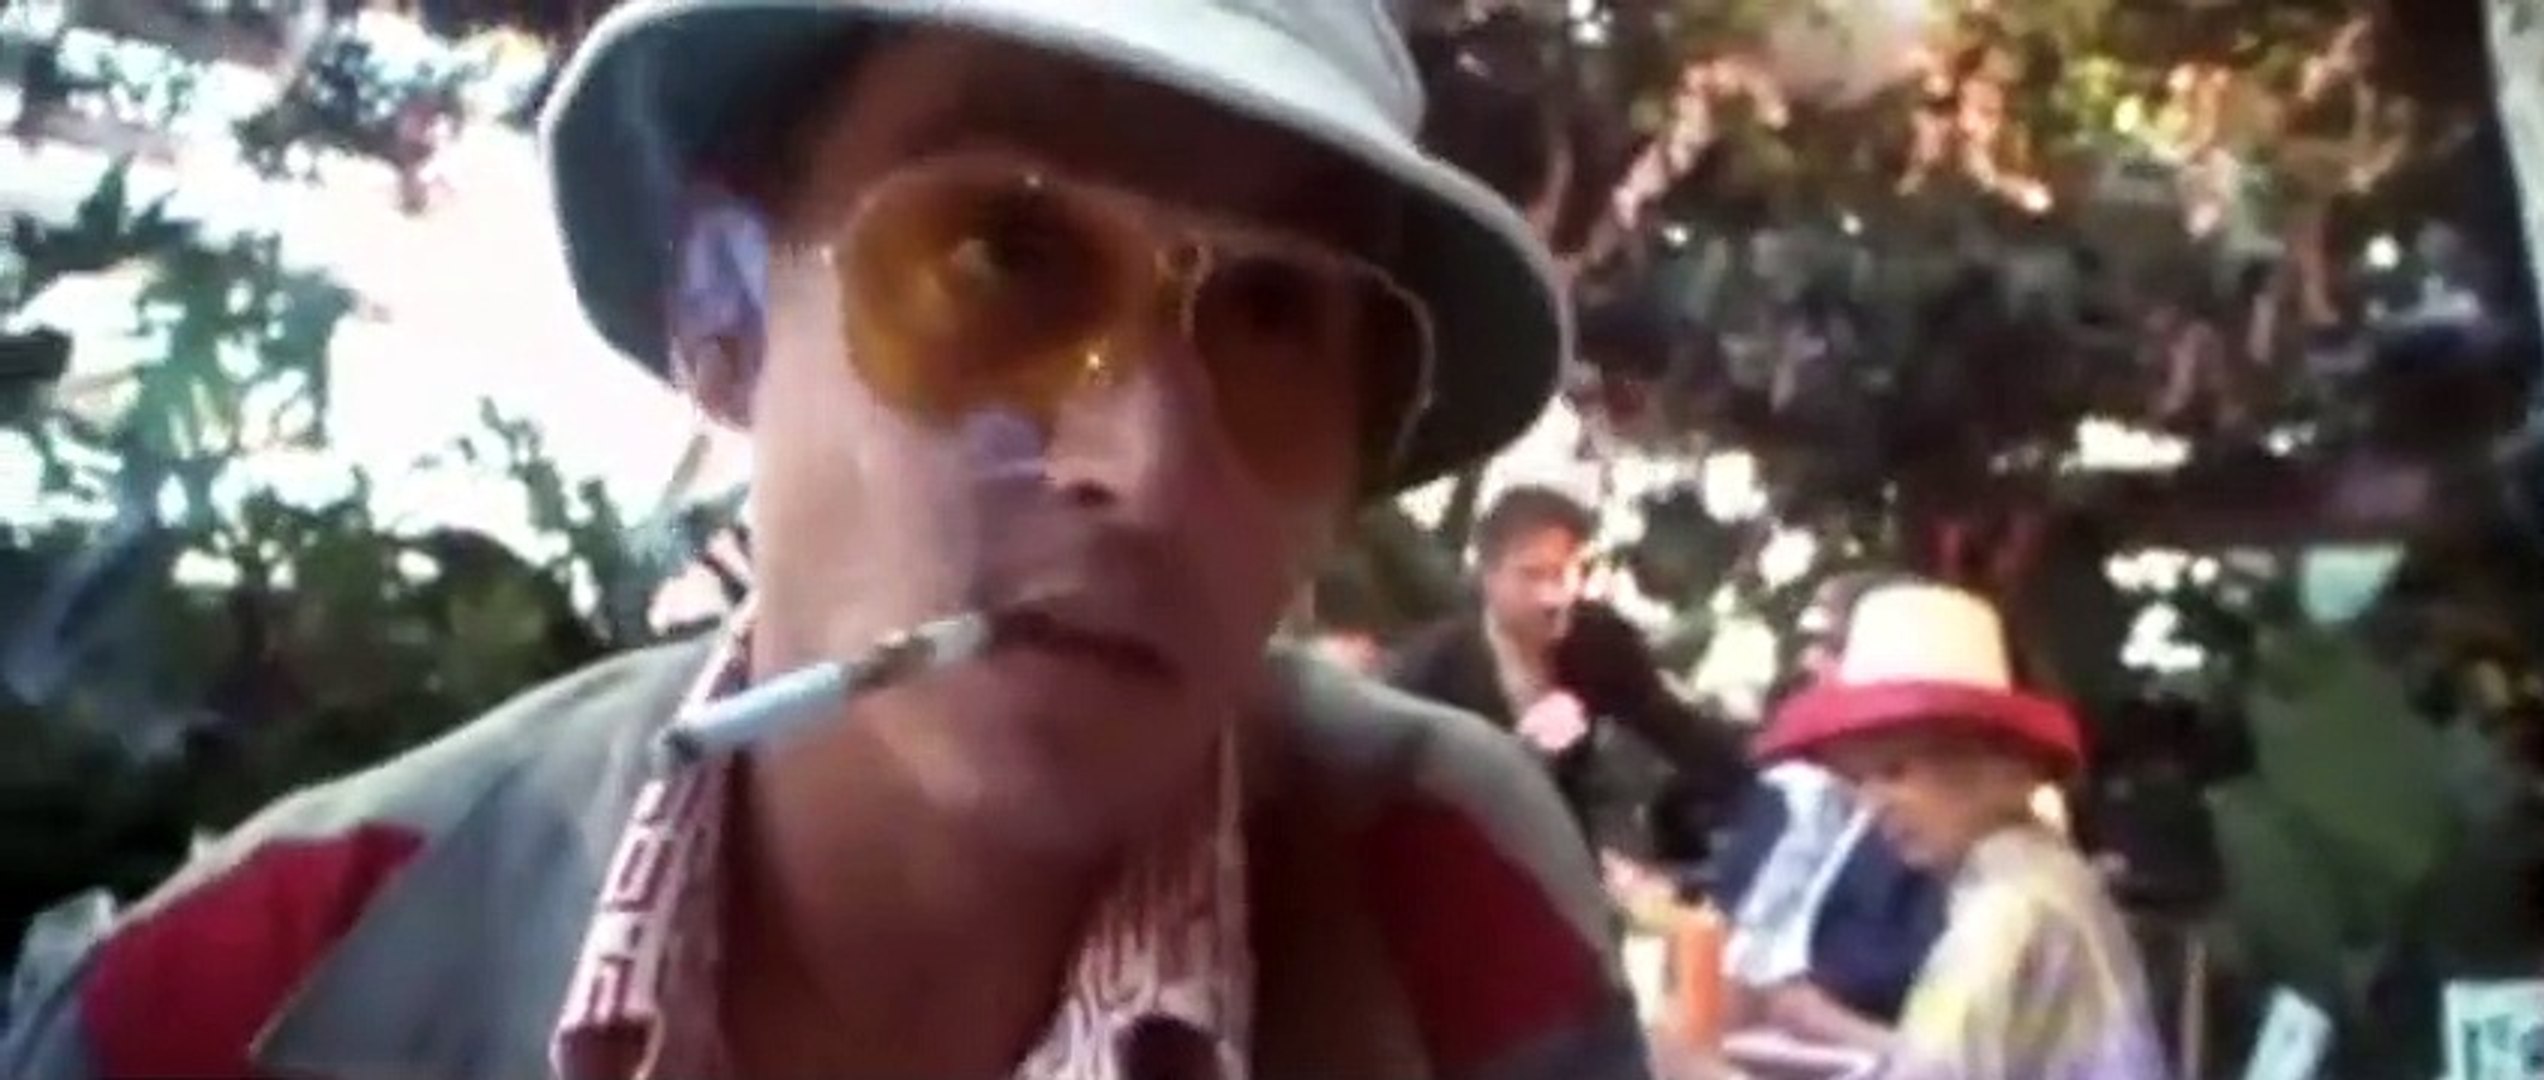 The latest Fear and Loathing in Las Vegas (film) videos on Dailymotion